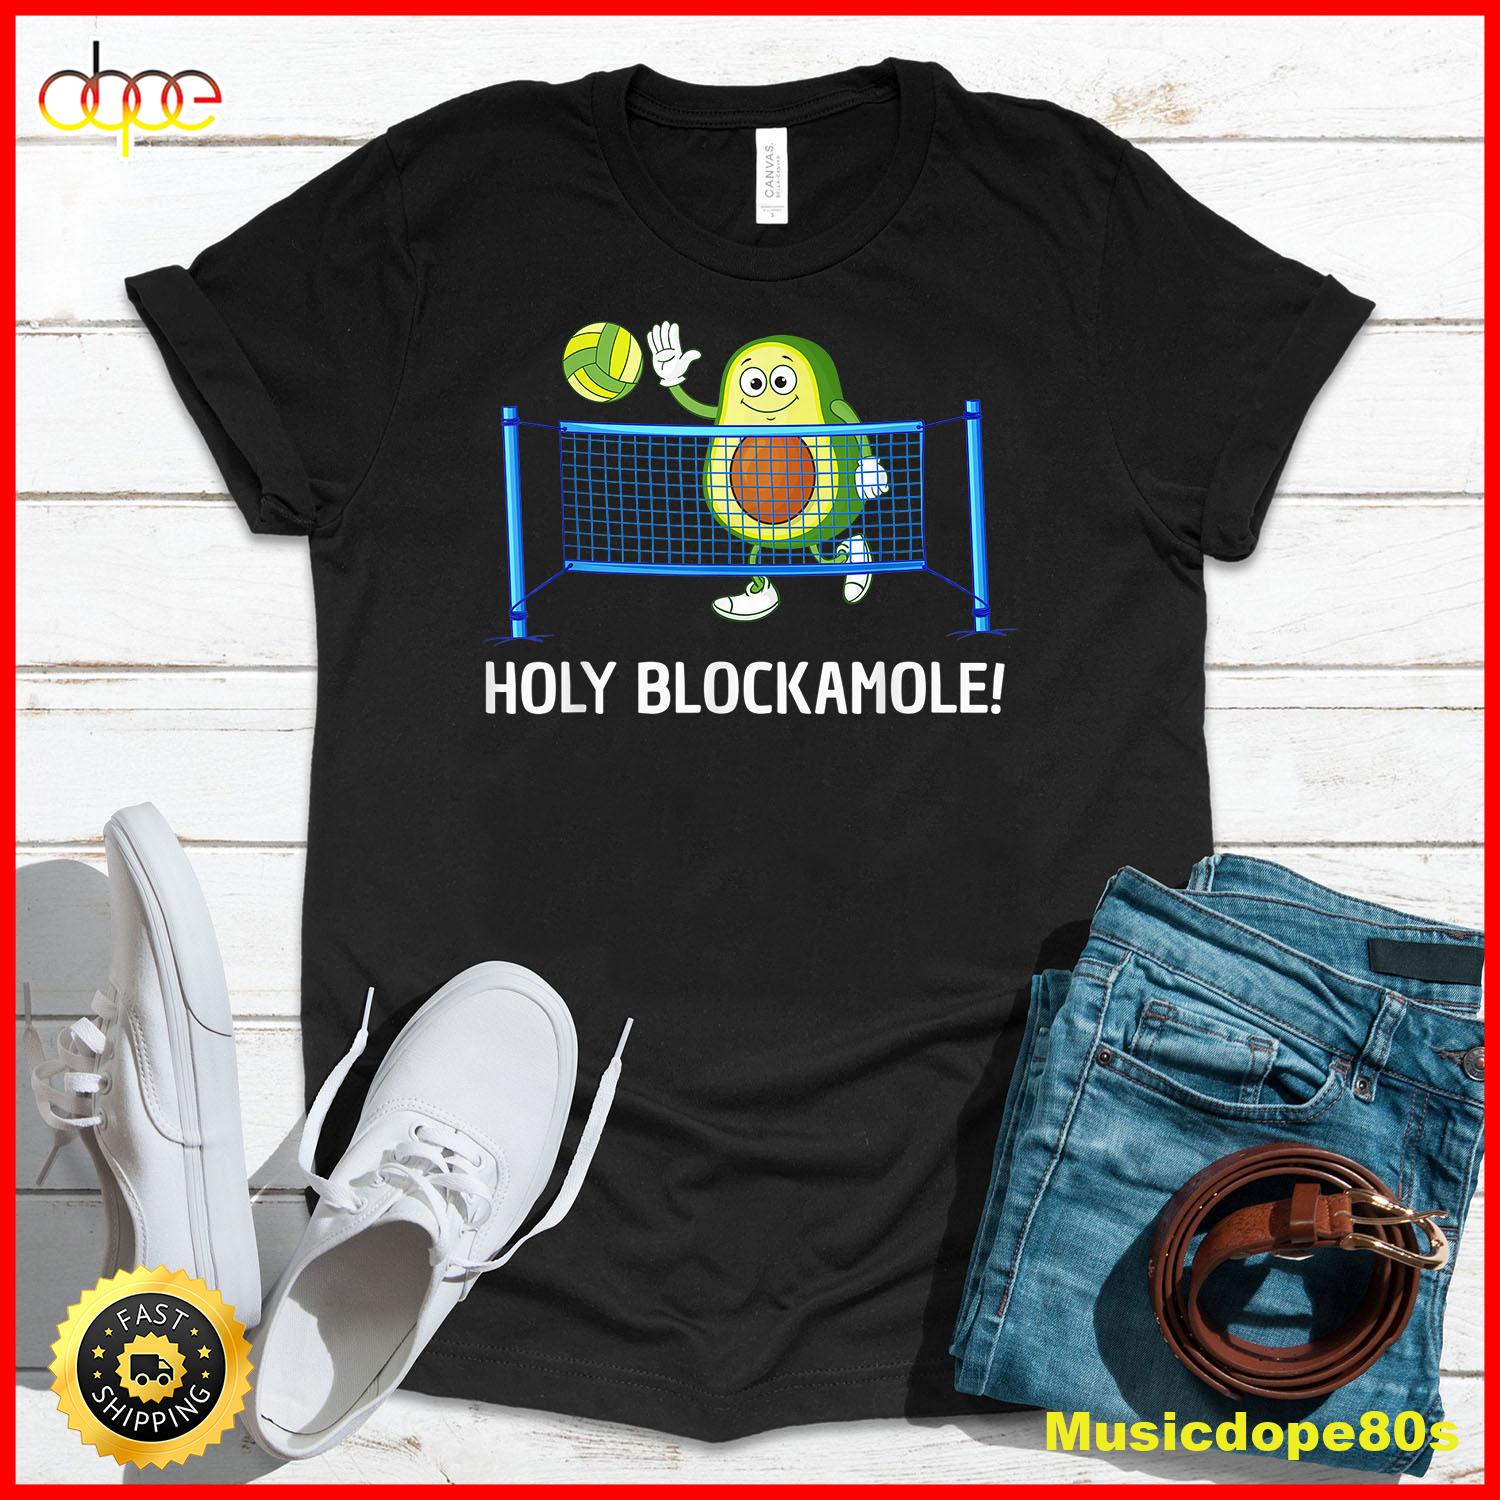 Funny Volleyball Design For Men Women Volleyball Players T Shirt